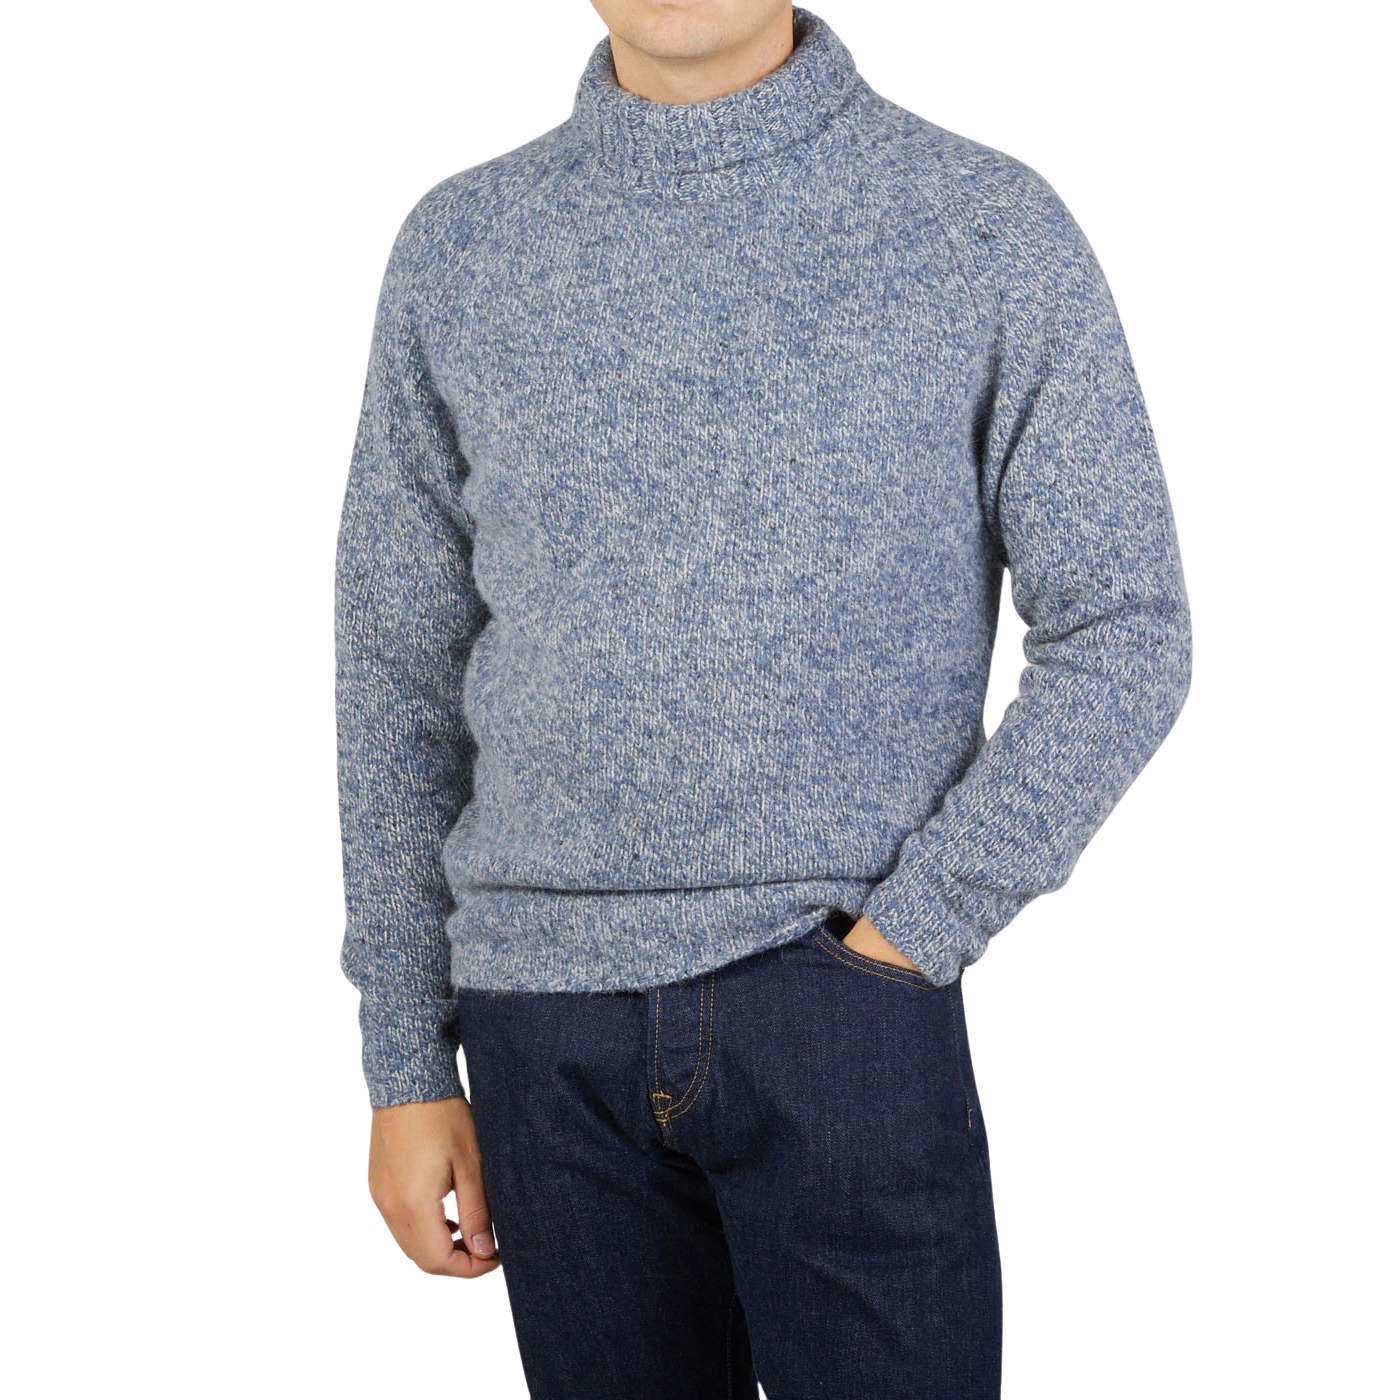 Men's Over Roll-Neck Knit Sweater, storefront catalog ca